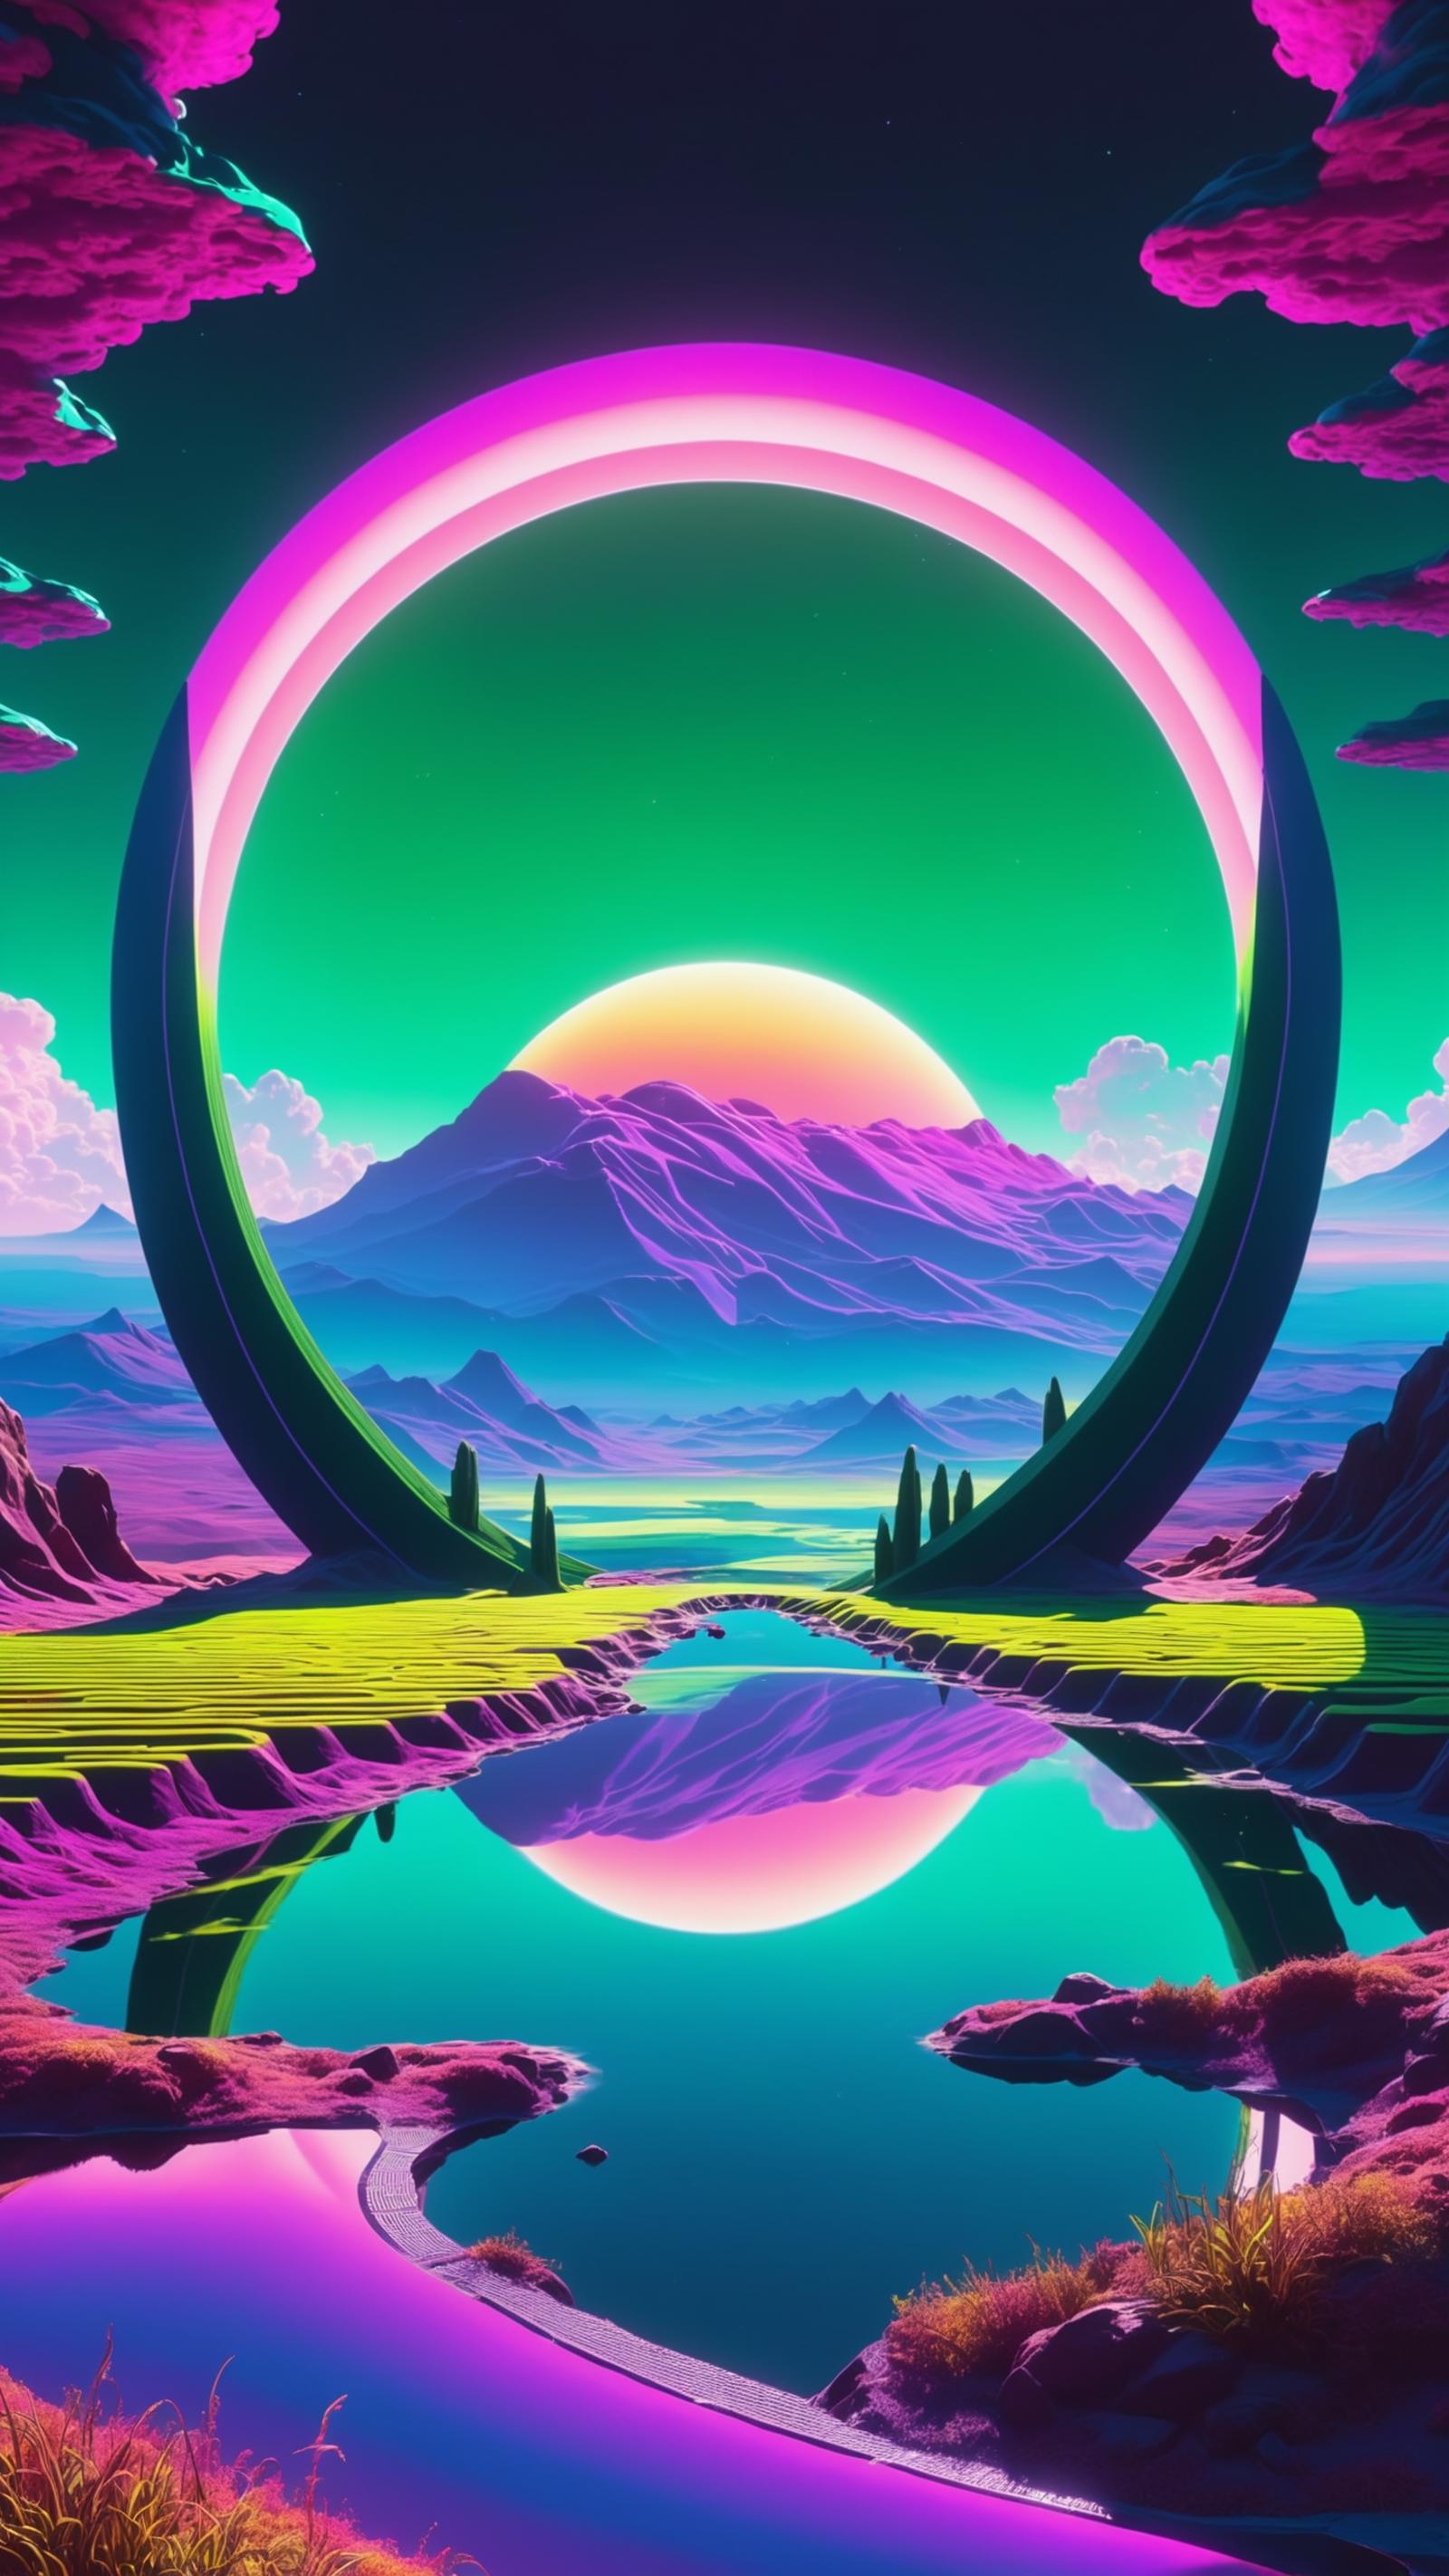 An Artistic Landscape with Mountains, Trees, and a Circular Shape Reflection